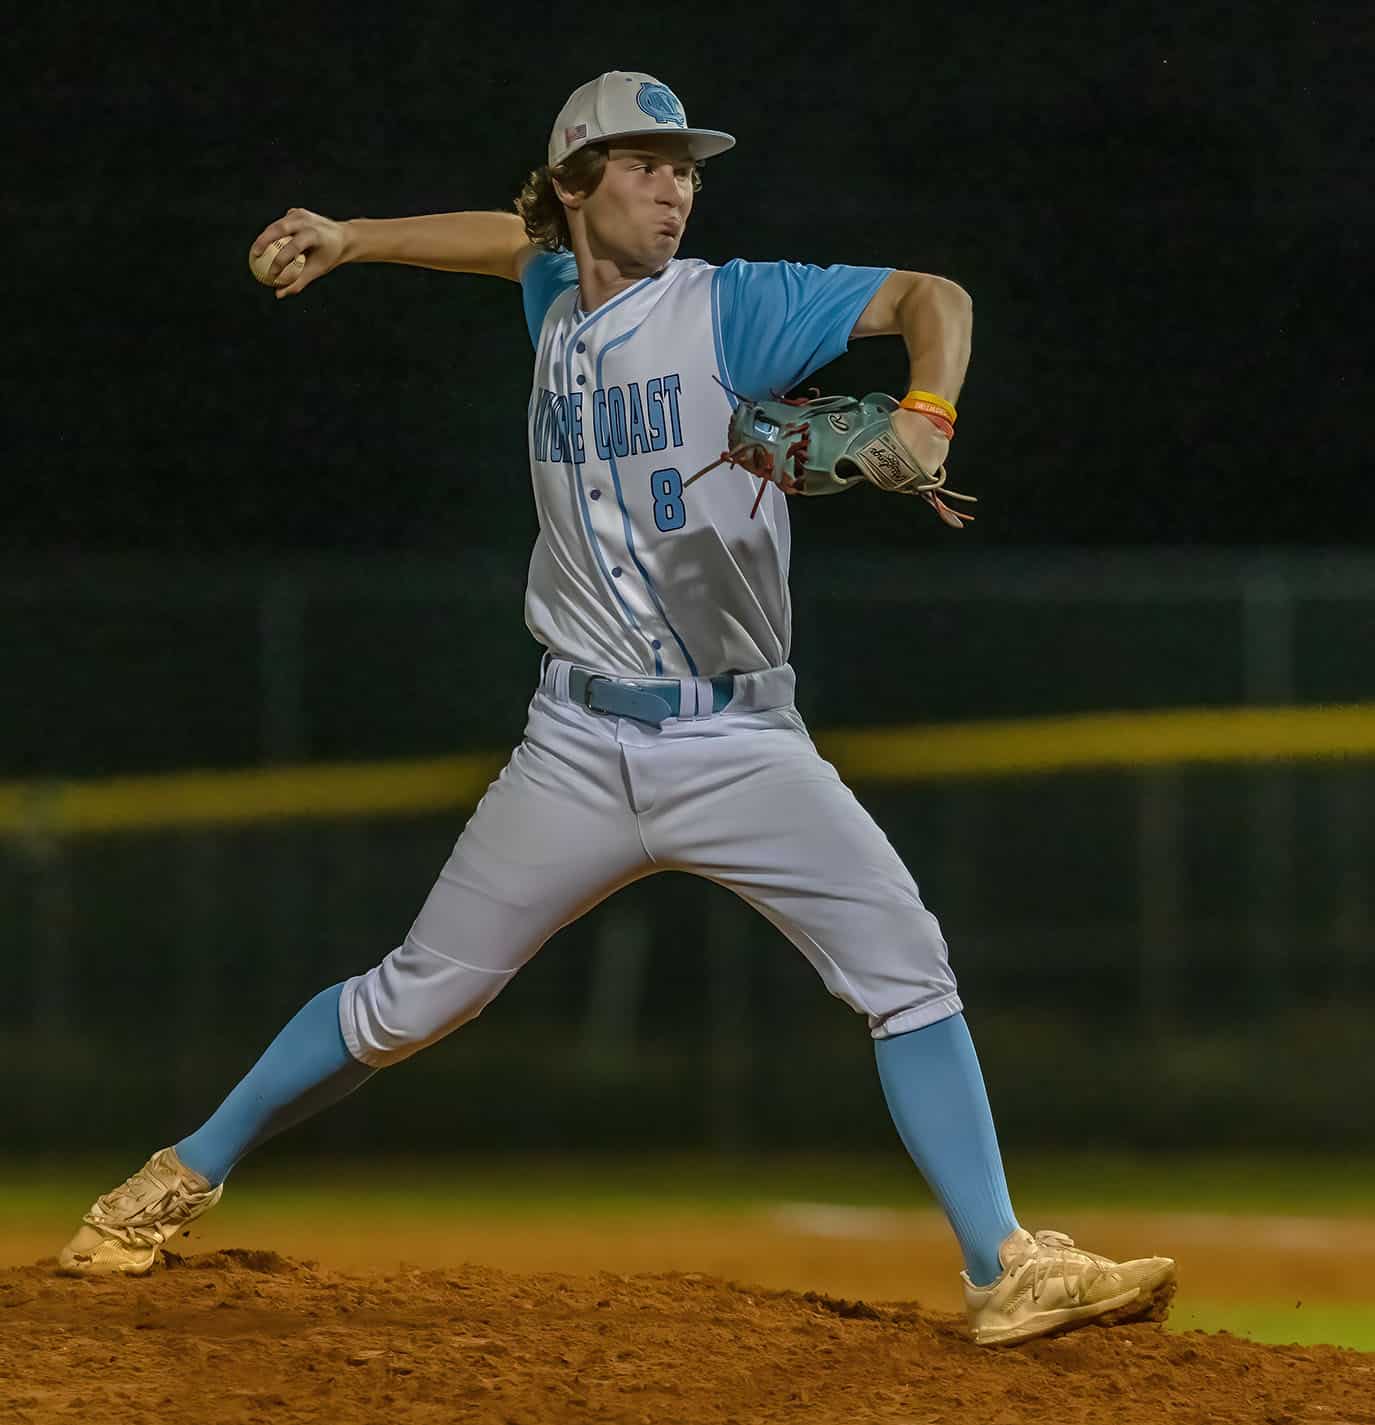 Nature Coast, 8, Sean Keegan pitched in relief after Henando took a five run lead early against the Sharks Tuesday at NCT. Photo by JOE DiCRISTOFALO